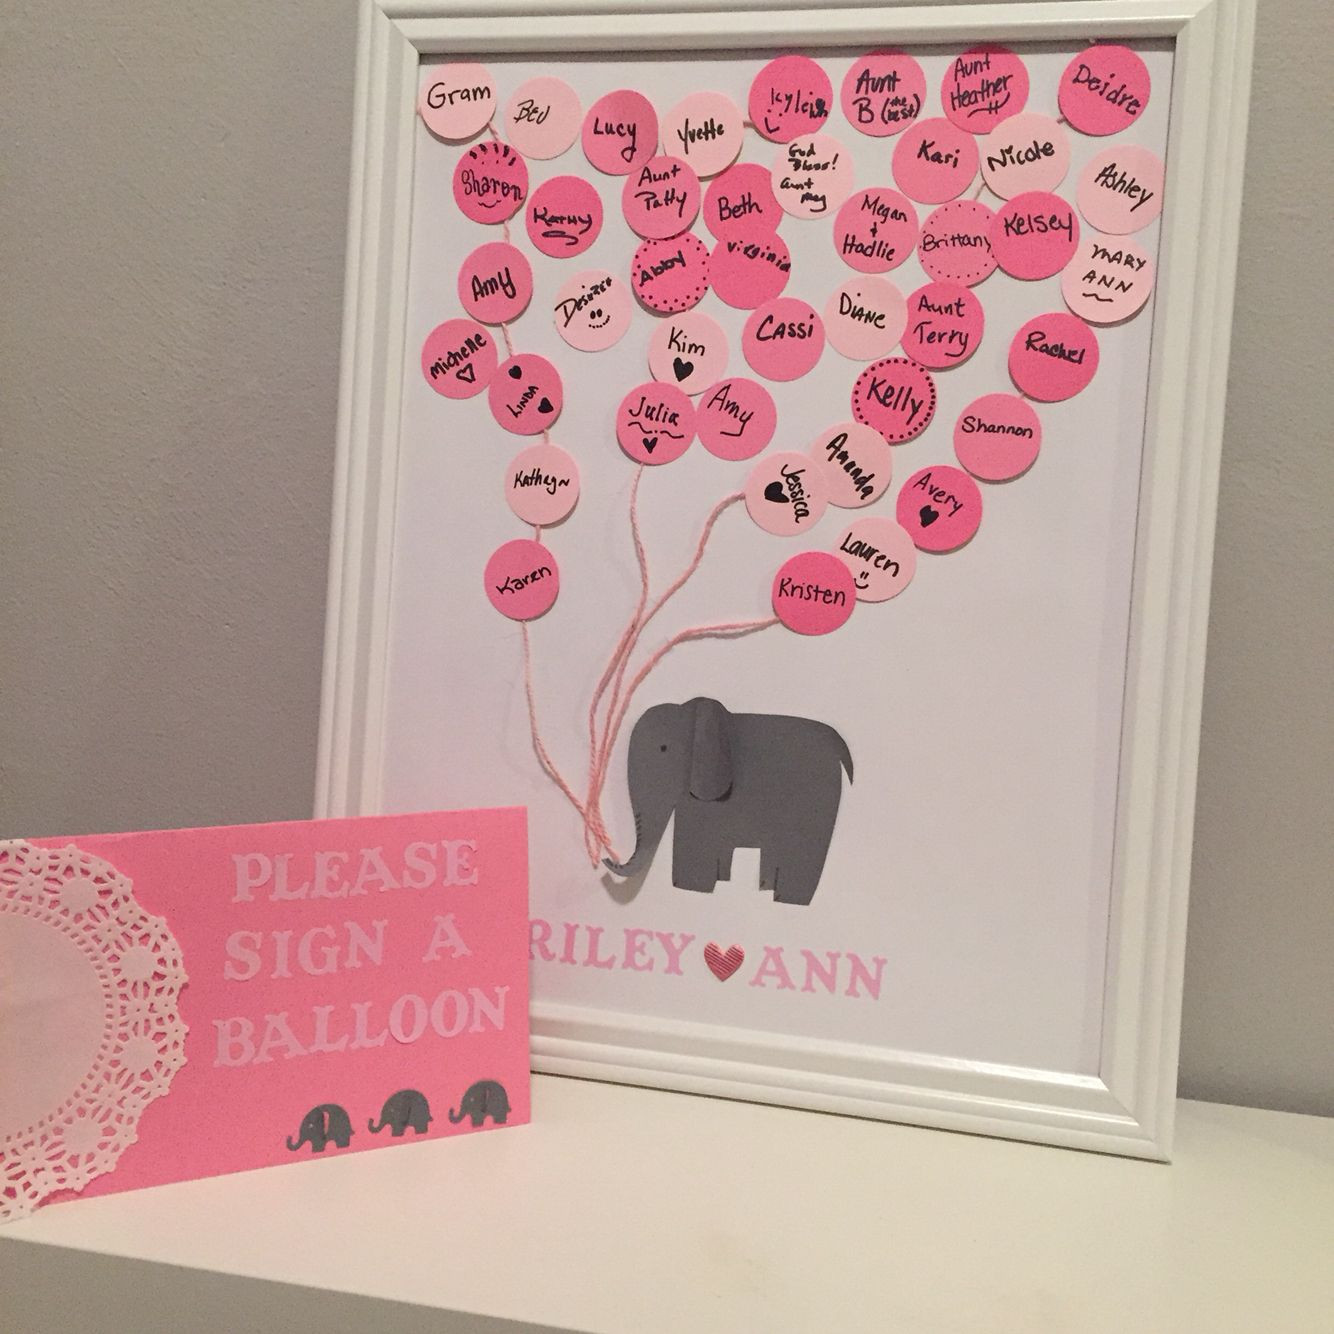 Diy Baby Shower Guest Book
 Diy baby shower guest book Elephant themed for our baby